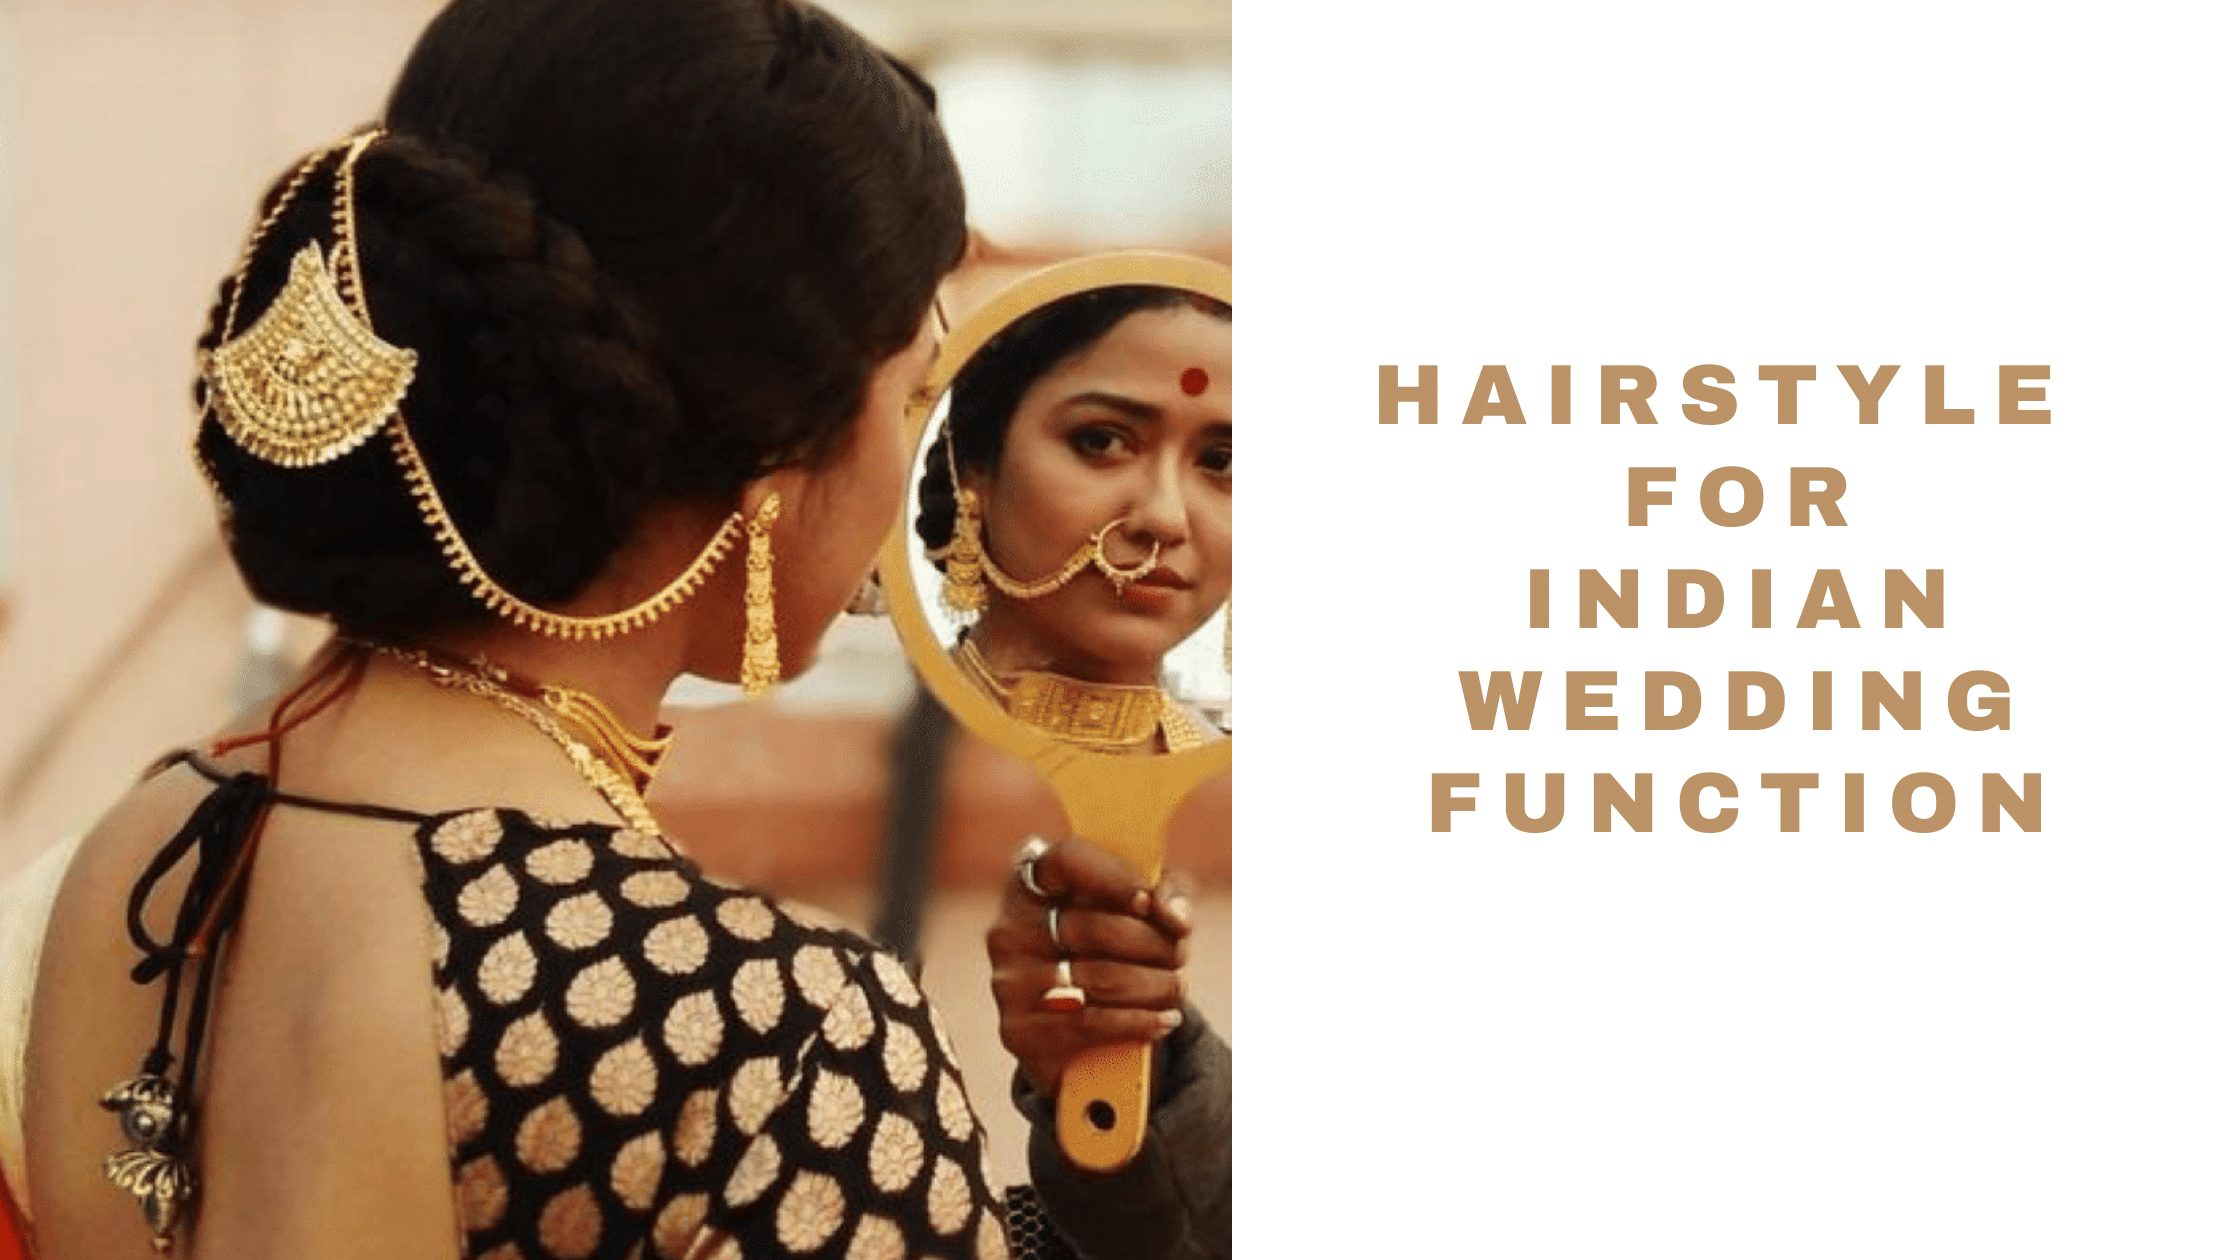 Hairstyle For Indian Wedding Function 2021 Best Hair Looks